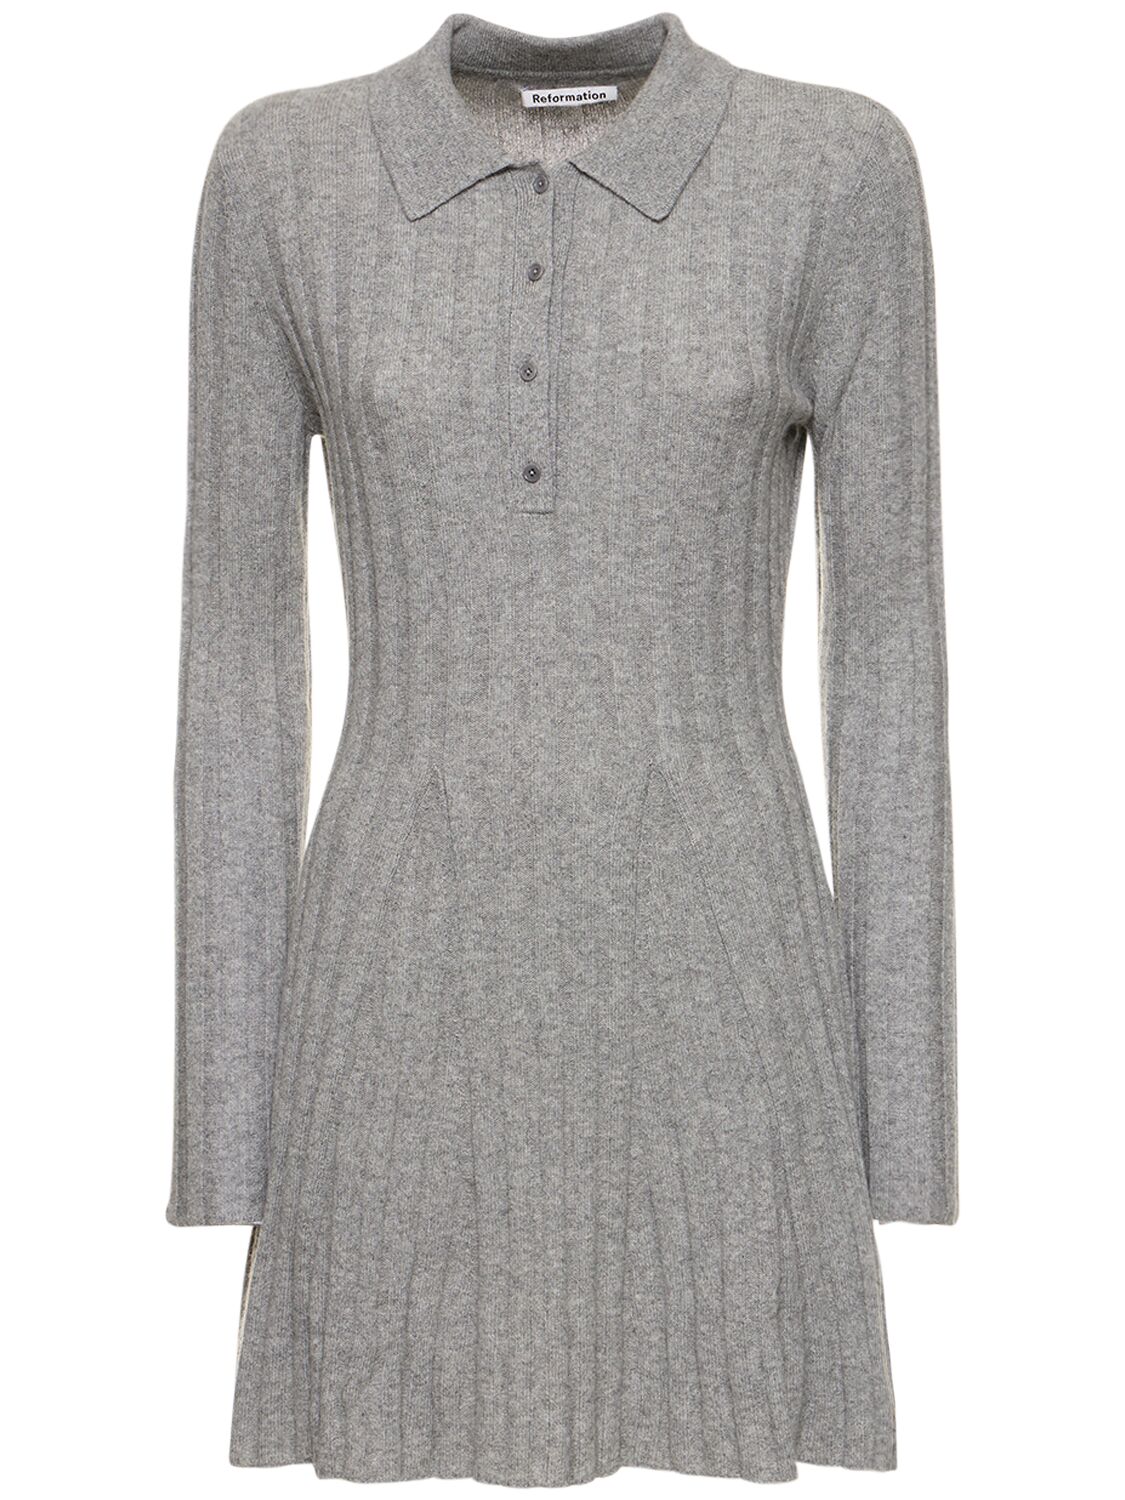 Reformation Walsh Collared Cashmere Mini Dress In Grey